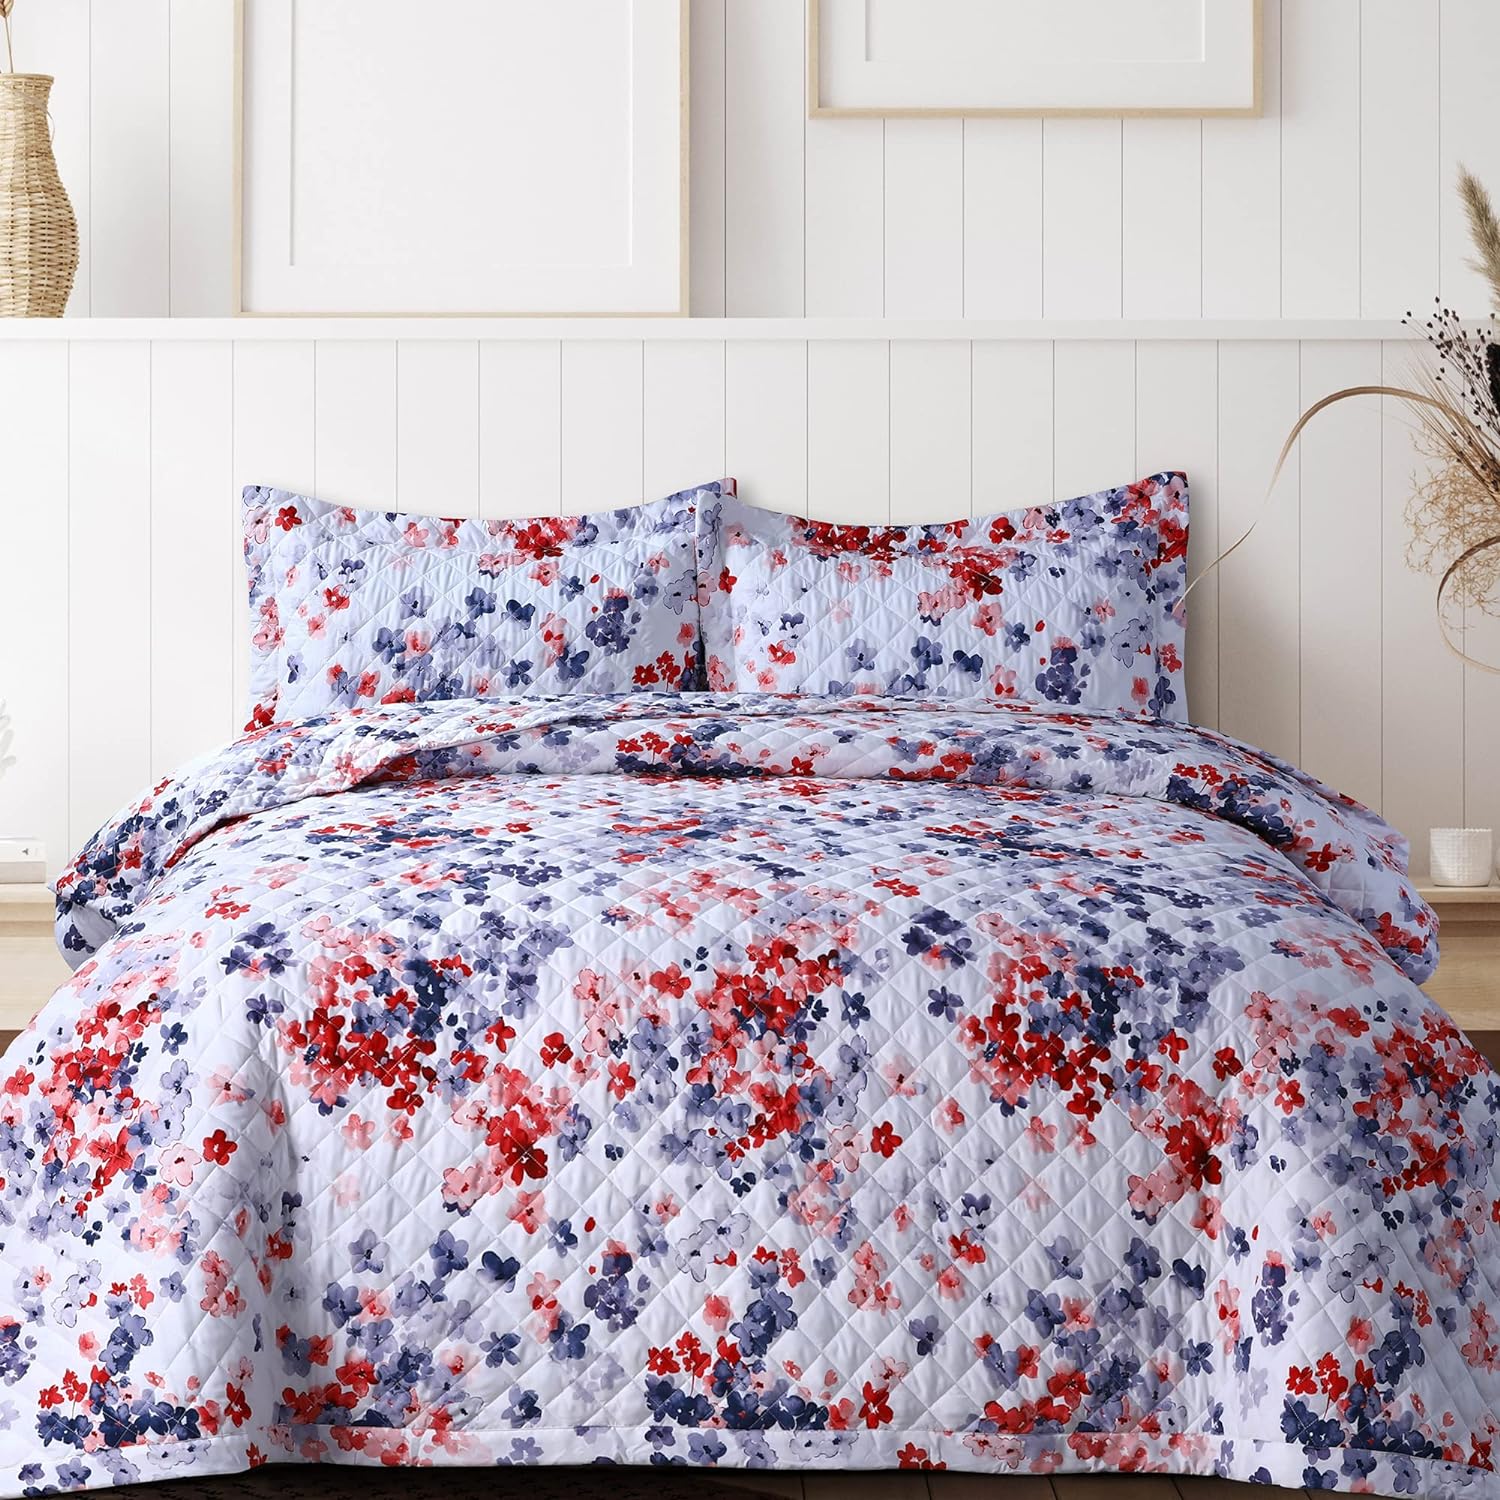 Juliette Floral Printed Ultra-Soft 3-Piece Oversized Quilt Set, Easy Care and Fade Resistant - Queen, Red